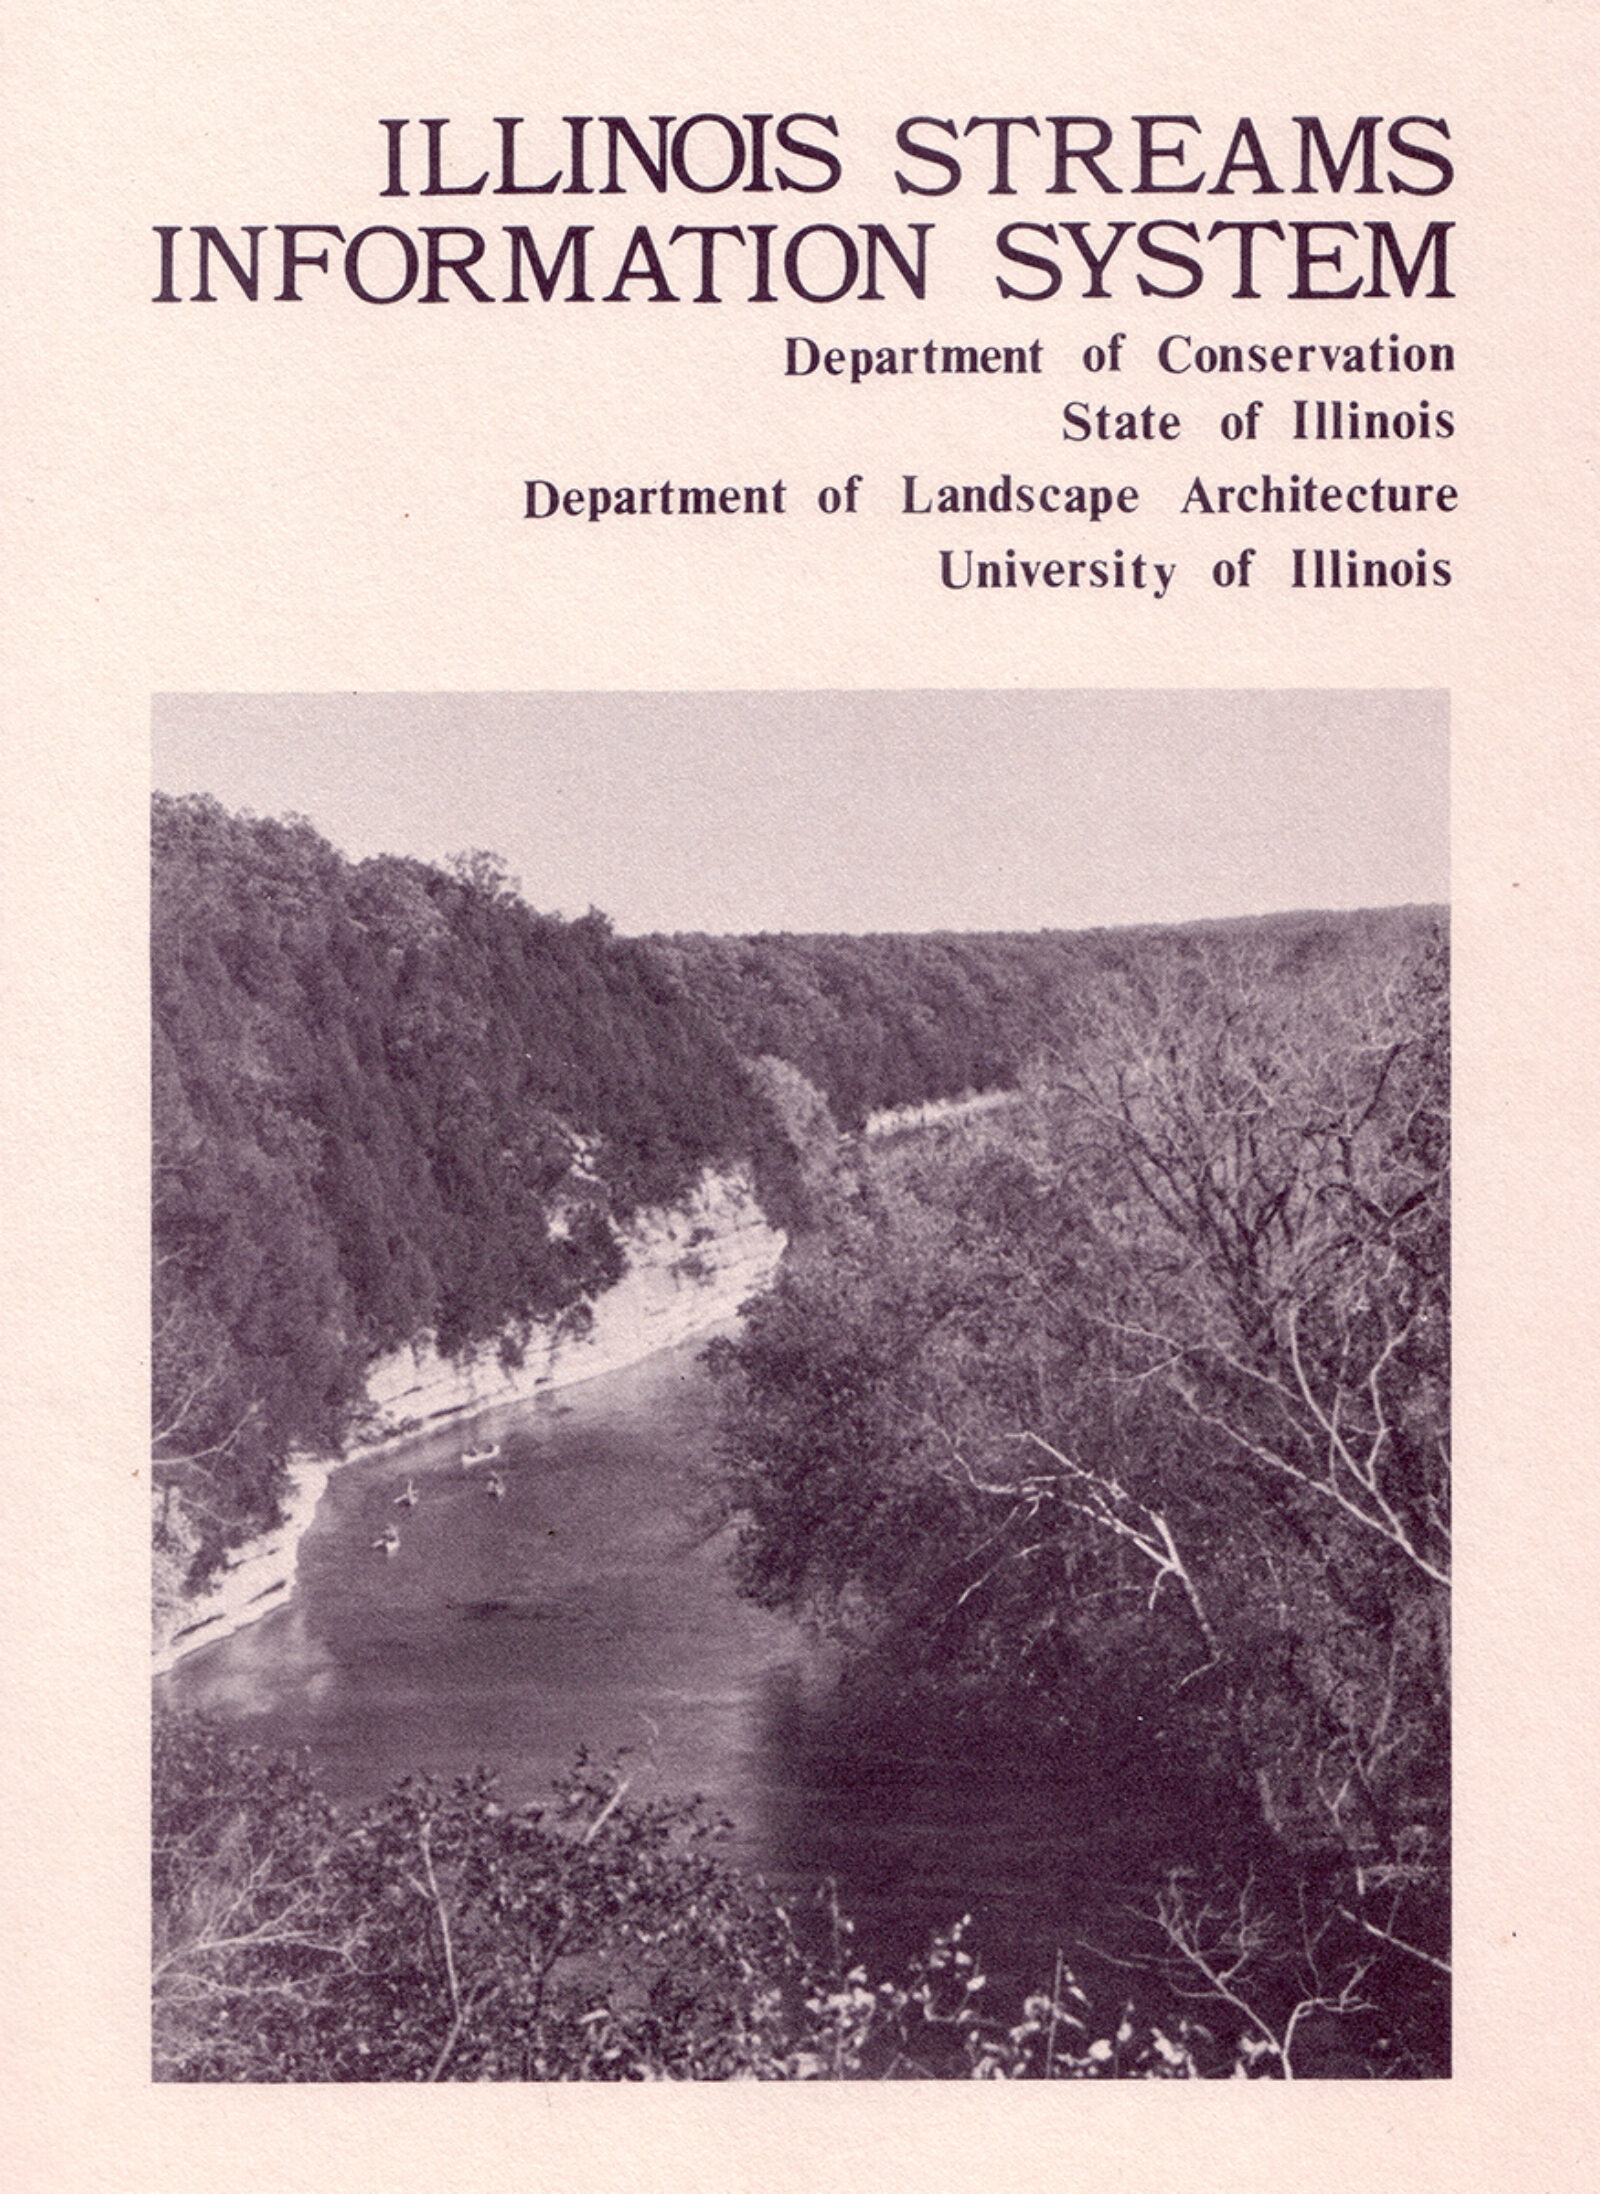 Cover of the Illinois Streams Information System report (1982)